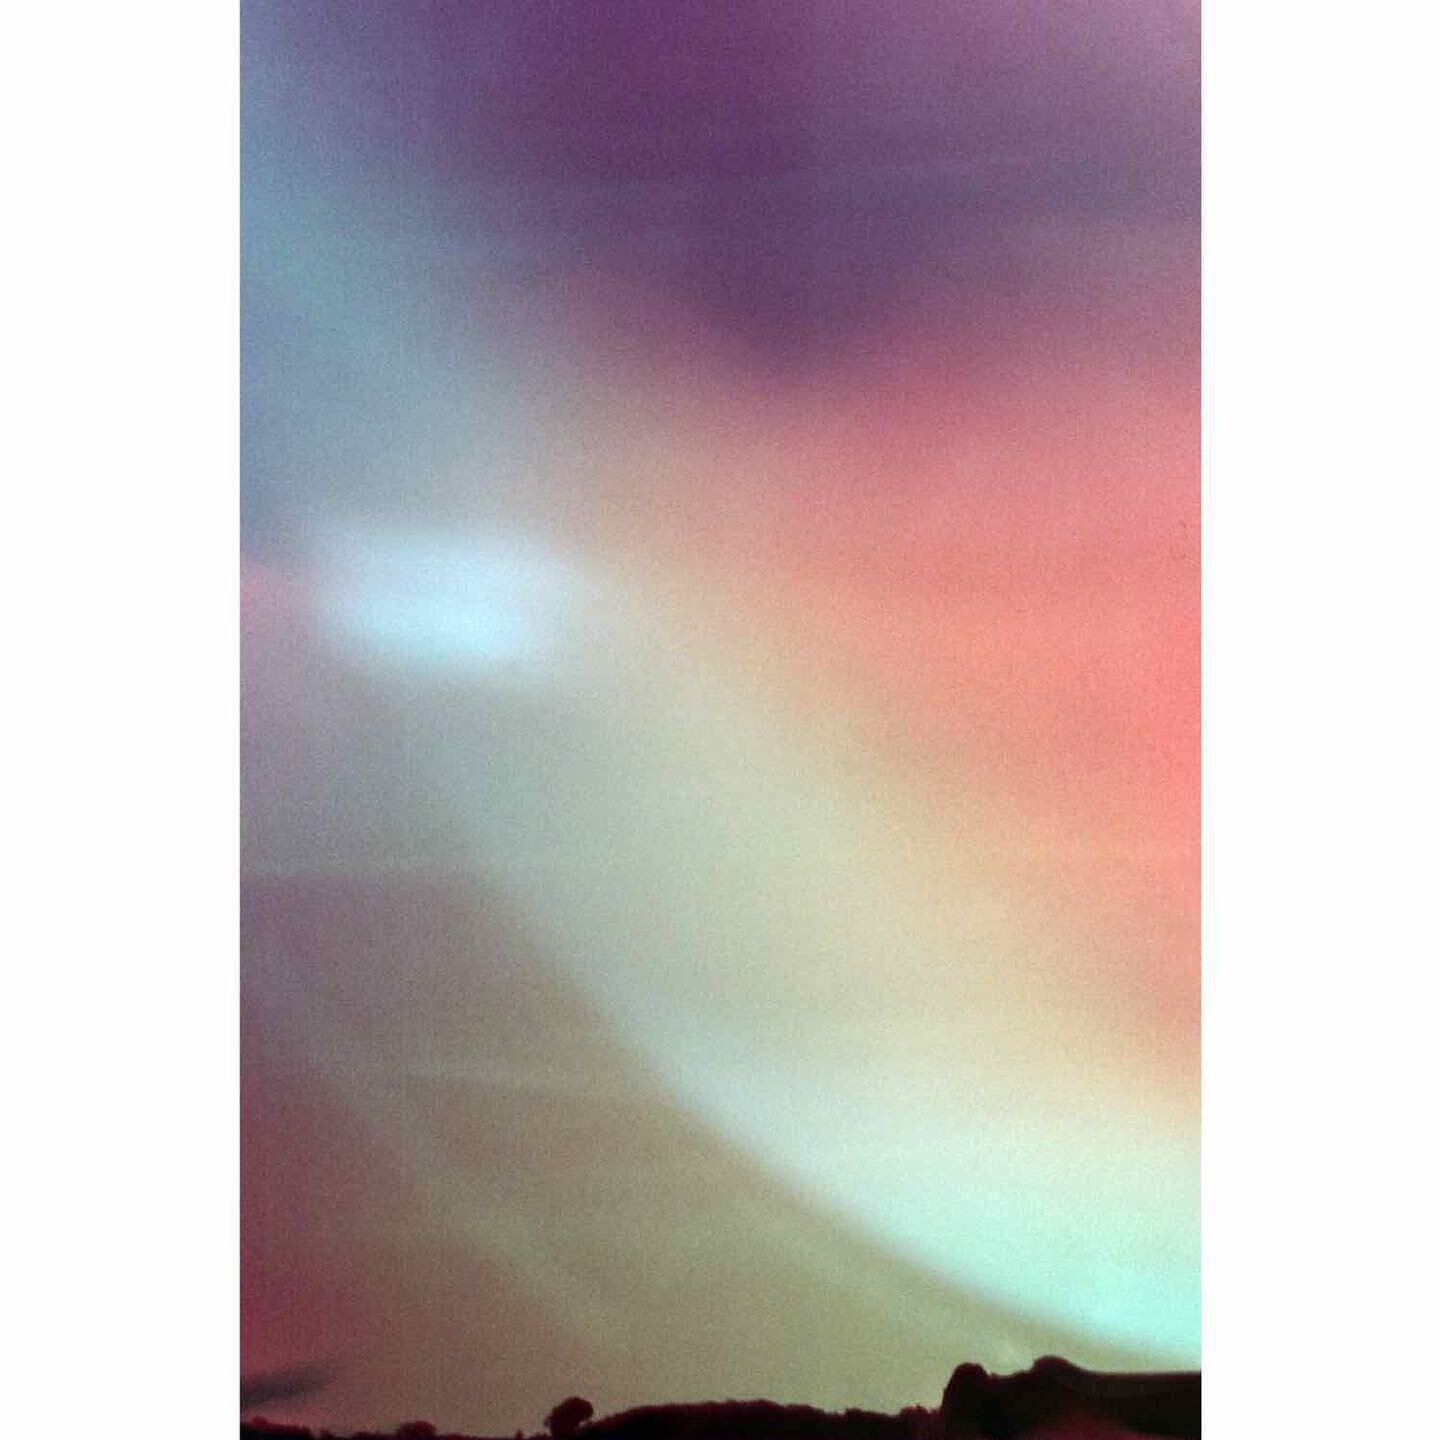 &ldquo;Imagined Landscape #8,&rdquo; 2013. In contrast, here are some old images from the same camera. Same body of work. 
.
.
.
.
.
.
#alternativeprocesses #antiquatedphotography #landscape #landscapephotography #landscapeart #colorfilm #earth #poet